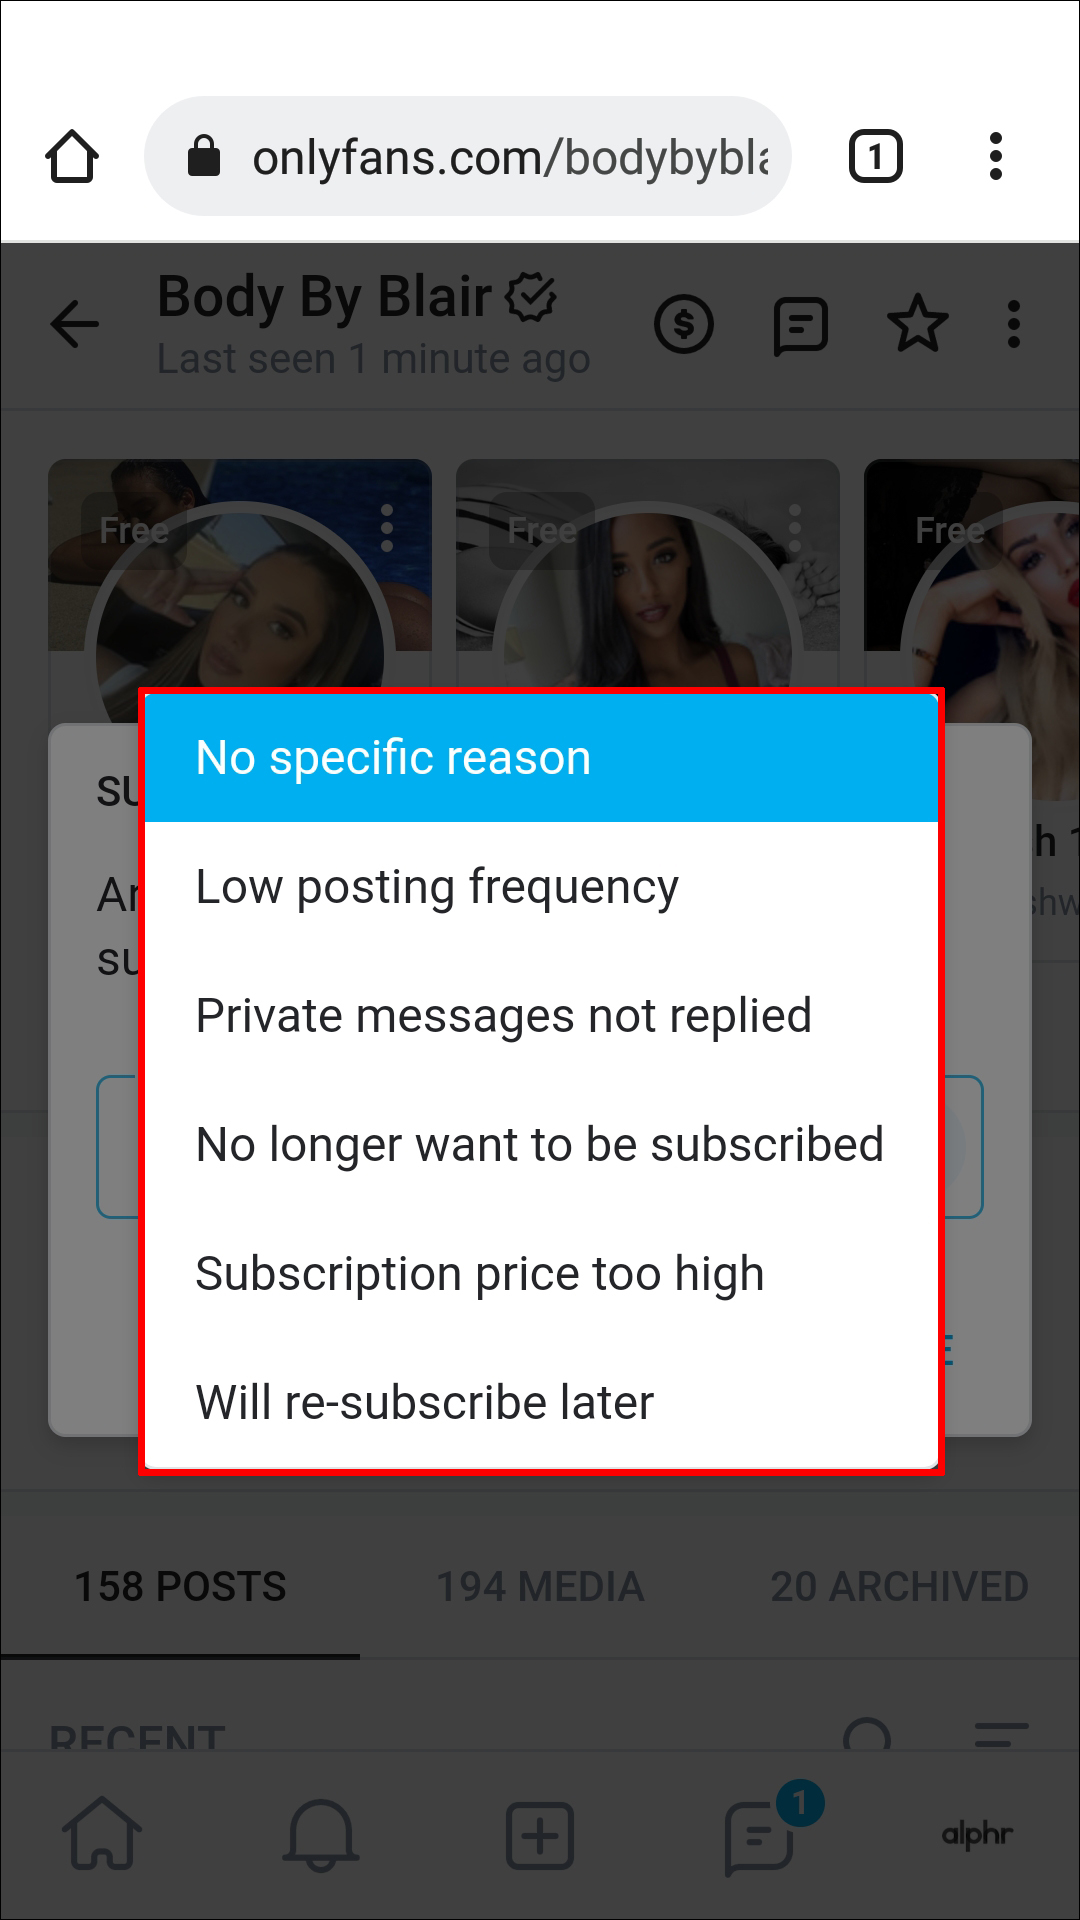 How to unsubscribe to onlyfans